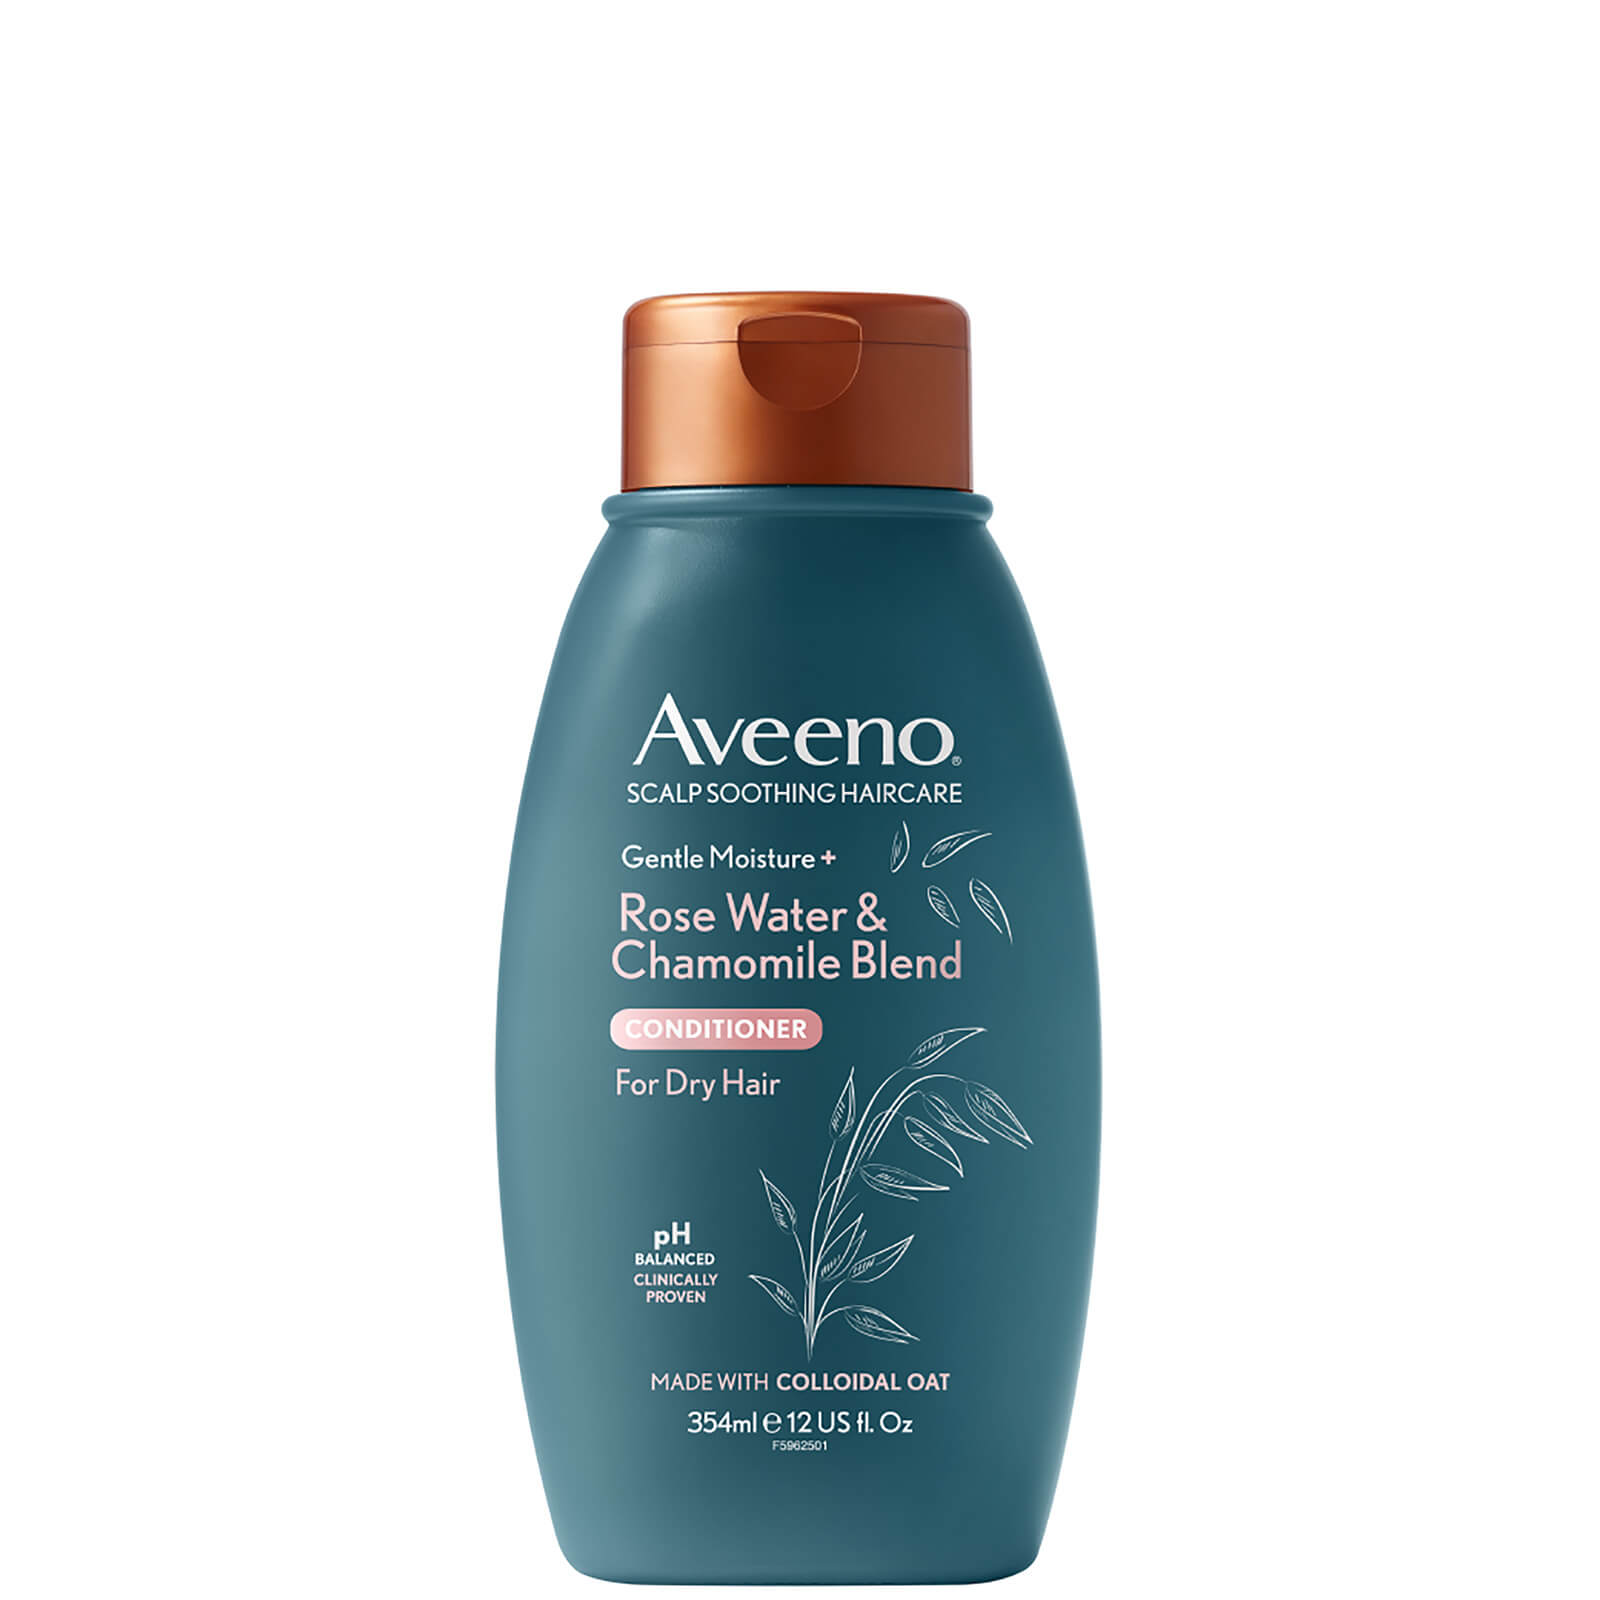 Aveeno Scalp Soothing Haircare Gentle Moisture Rosewater and Chamomile Conditioner 354ml